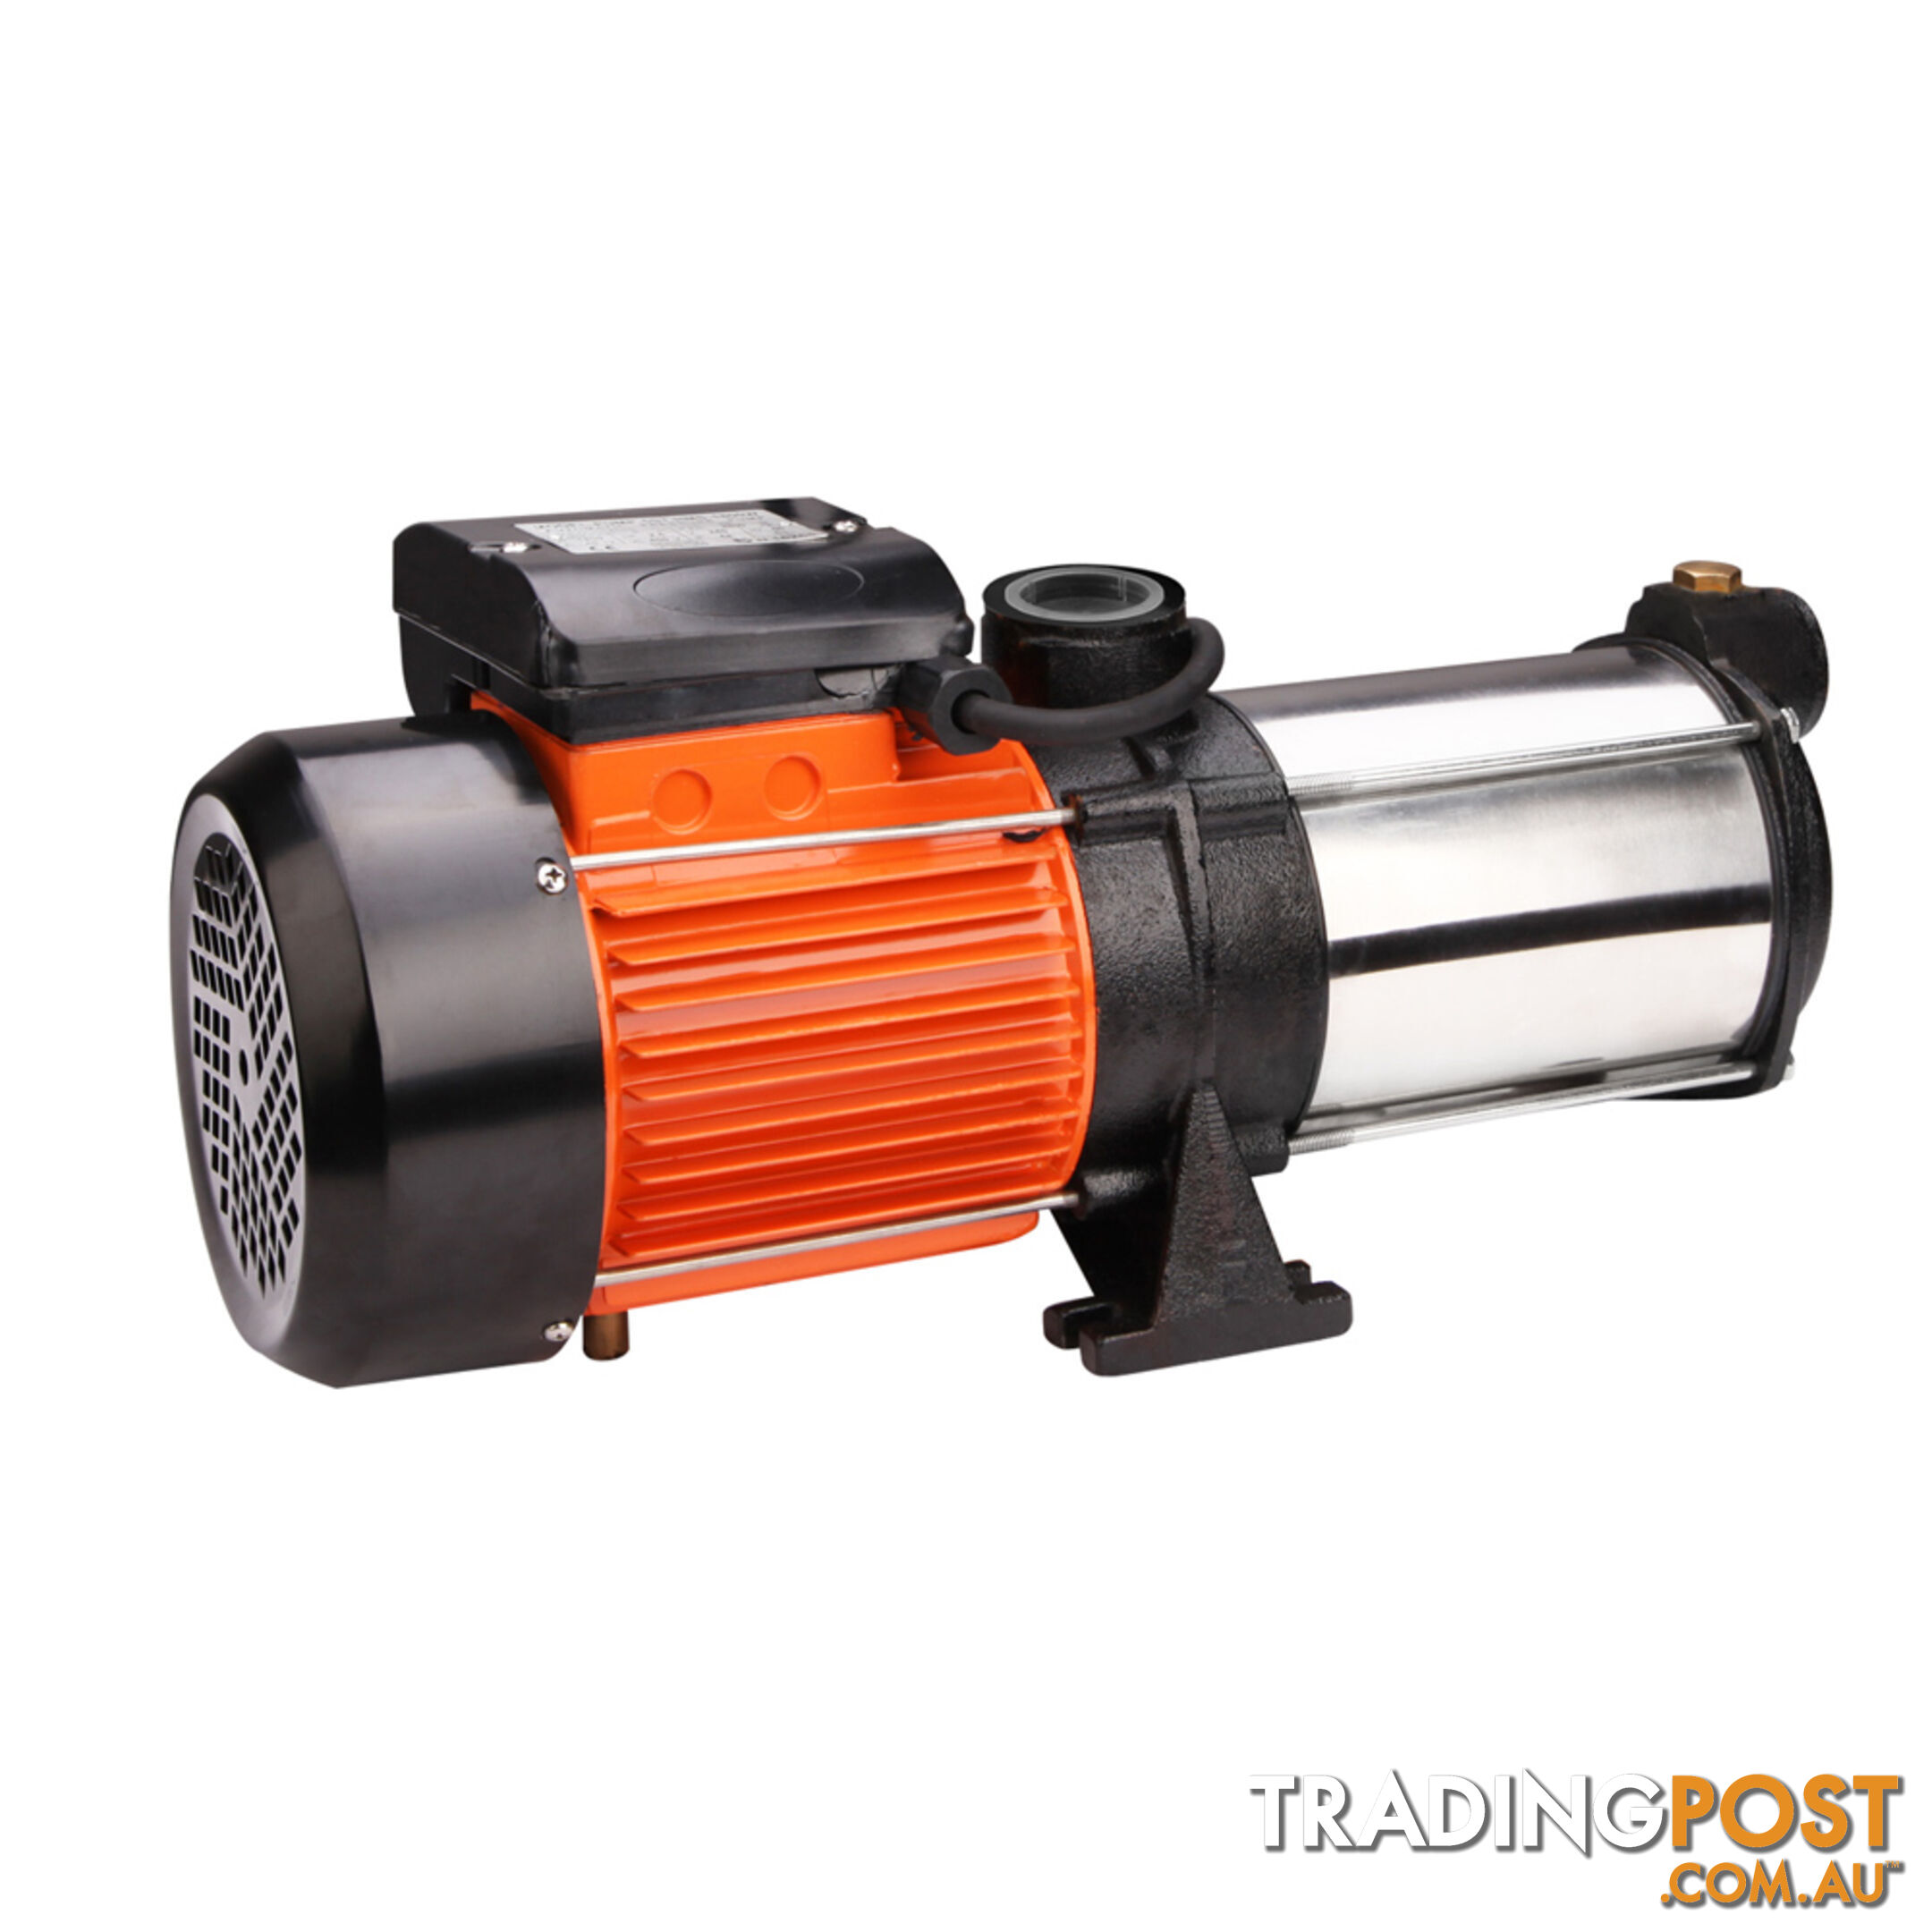 5 Stages Stainless Steel Pressure Pump 1800W 12600L/H